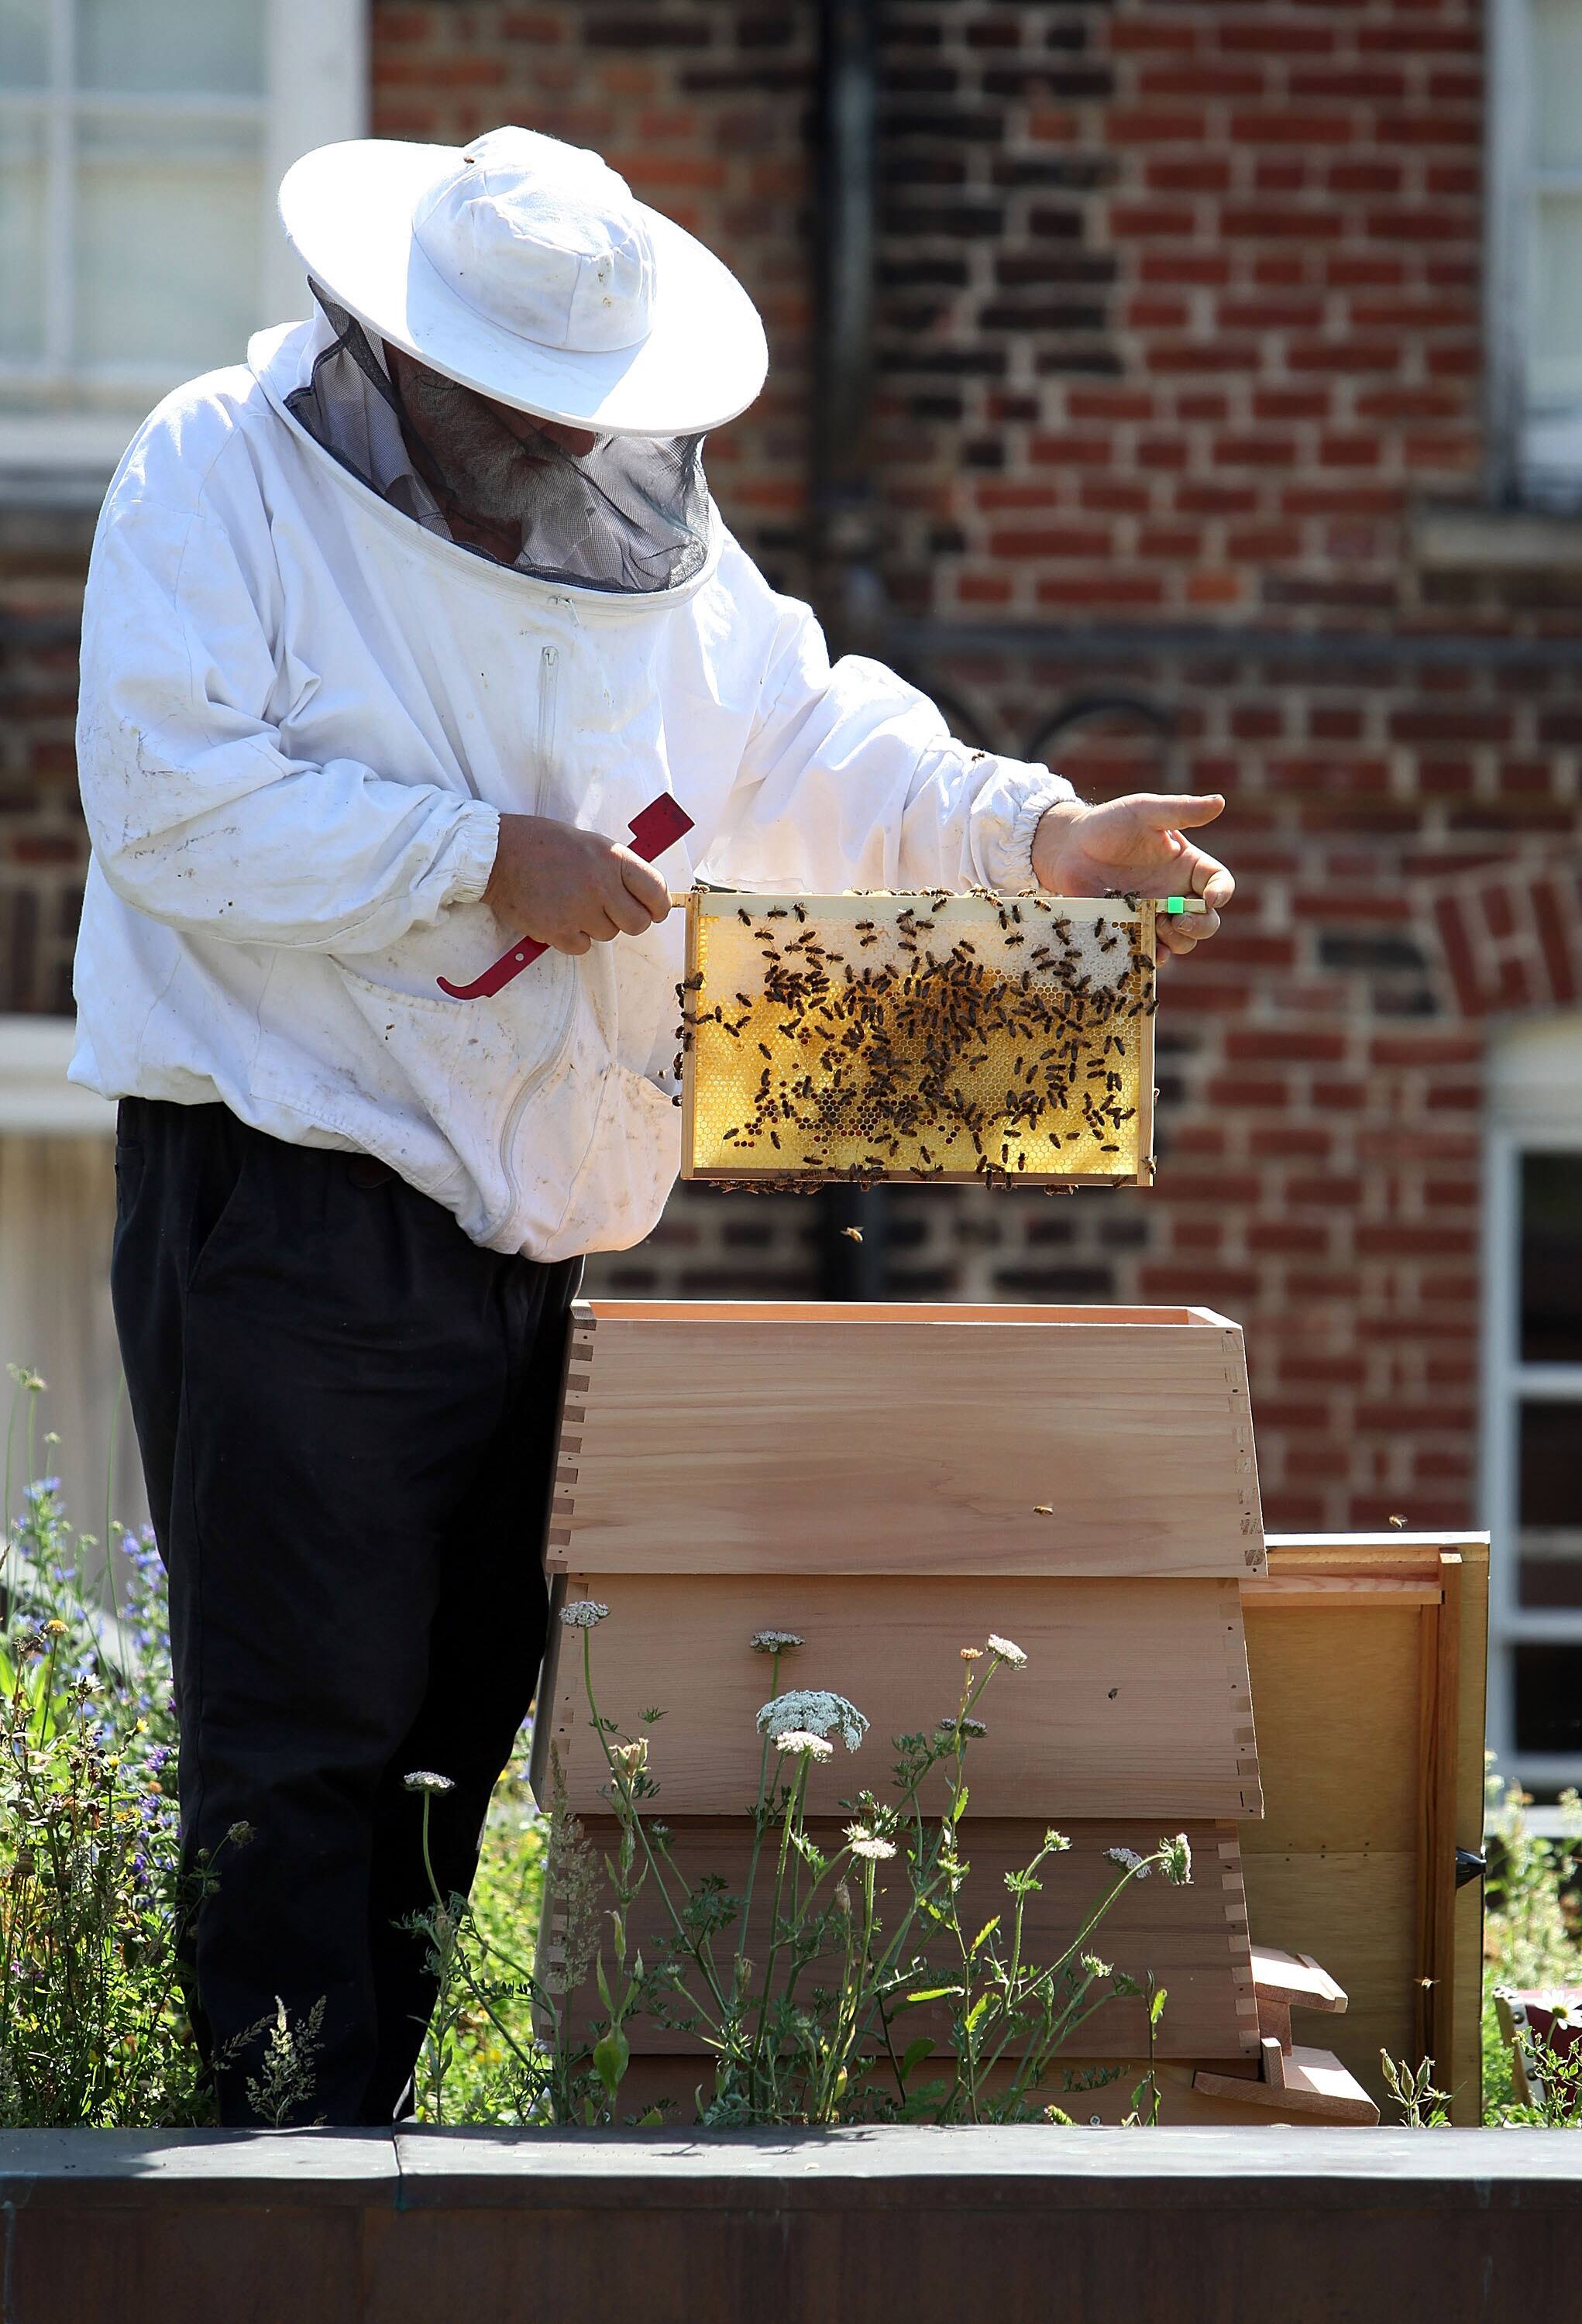 LONDON, ENGLAND - JULY 1:  Beekeeper and Chairman of The London Beekeepers Association John Chapple installs a new bee hive on an urban rooftop garden in Islington on July 1, 2009 in London, England. The UK has an estimated 274,000 bee colonies producing an average of 6000 tonnes of honey per year. An estimated 44,000 beekeepers manage these hives with each one containing around 20,000 bees. It is estimated that honeybee numbers in the UK have fallen between ten and 15 per cent in the last two years.  (Photo by Dan Kitwood/Getty Images)